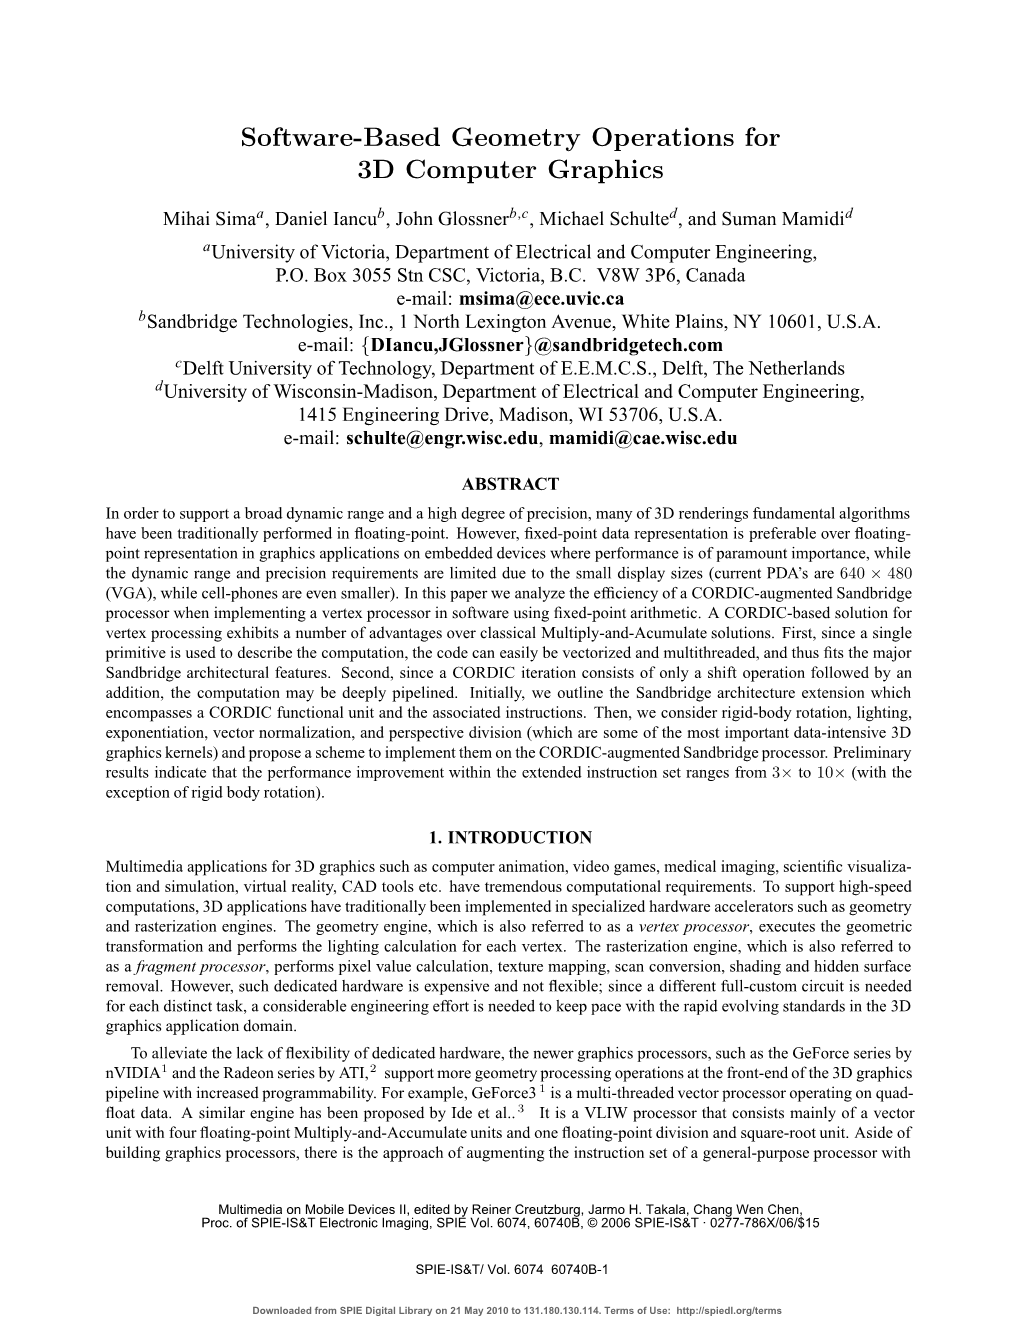 Software-Based Geometry Operations for 3D Computer Graphics